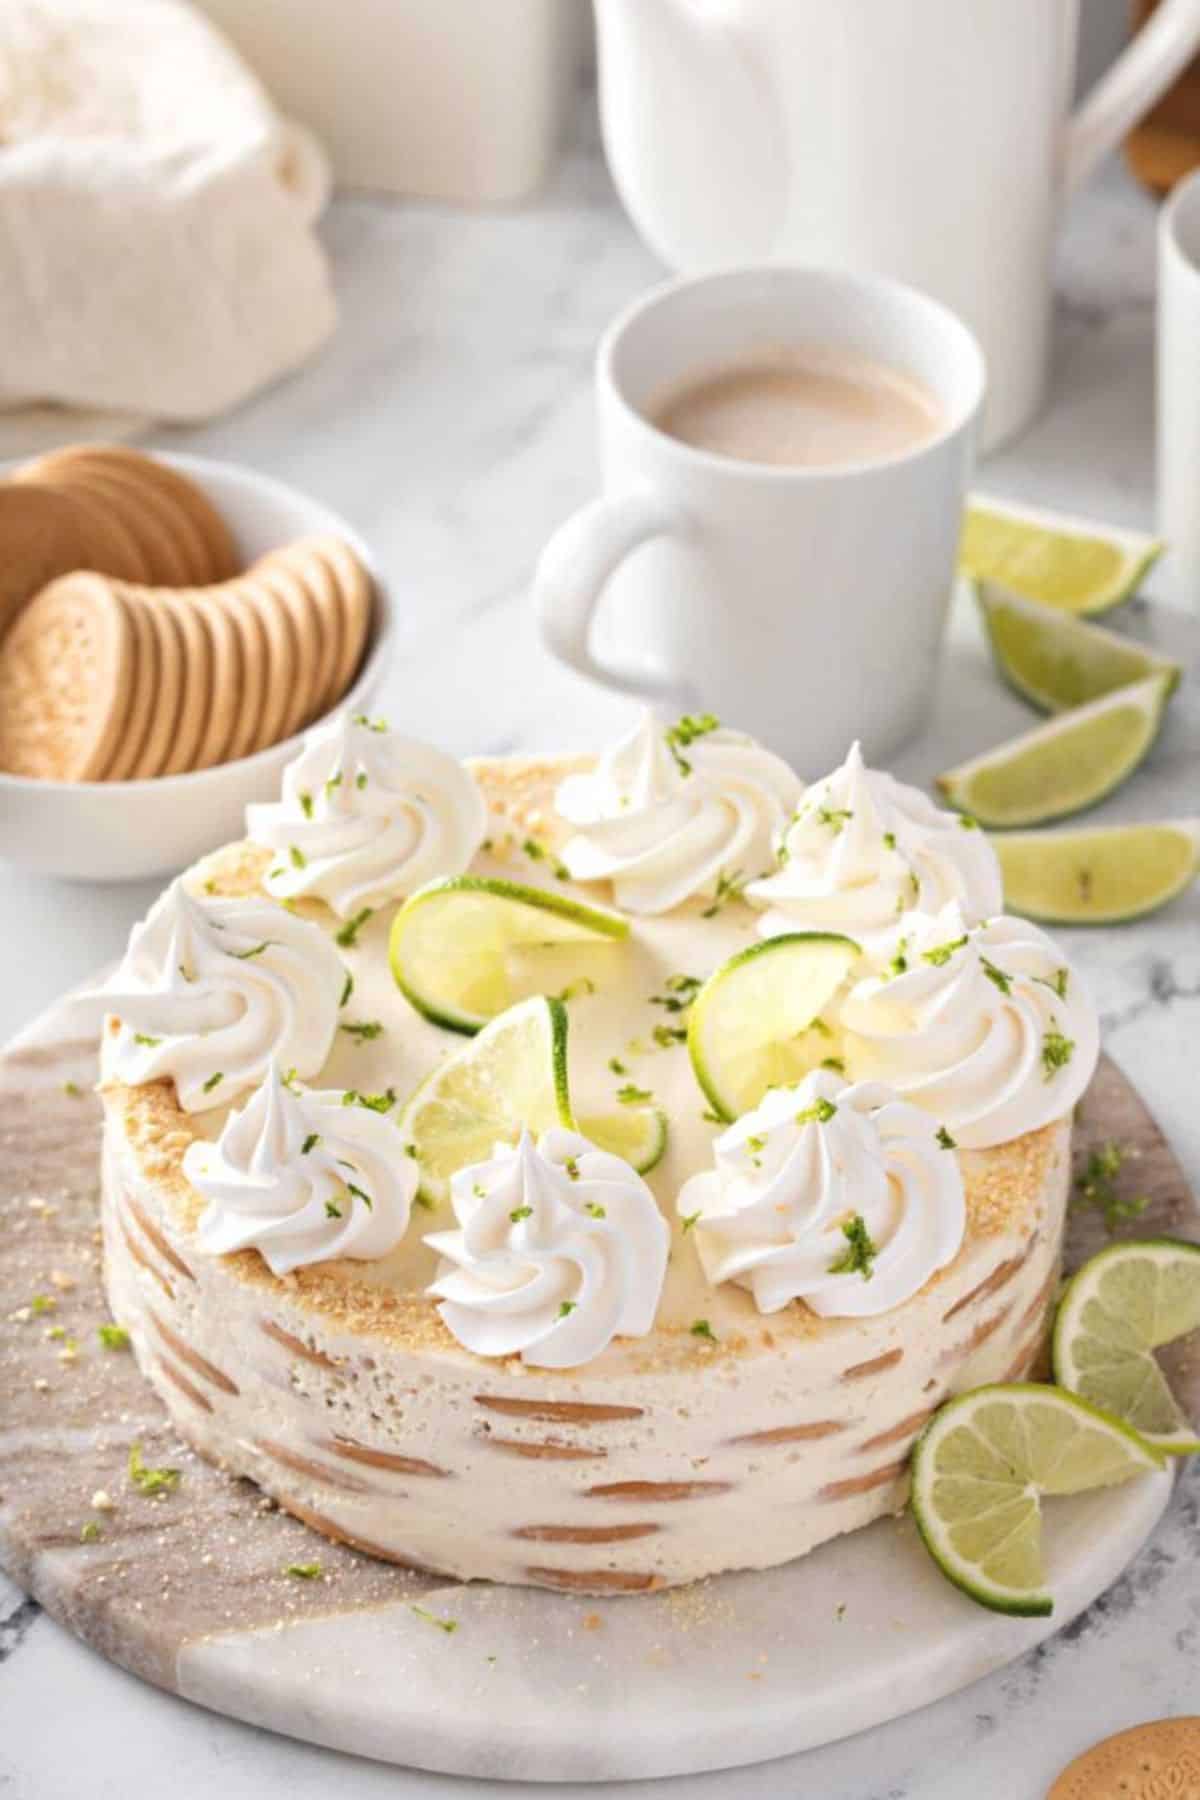 Carlota de Limón mexican cake with slices lime on the top on a wooden board.